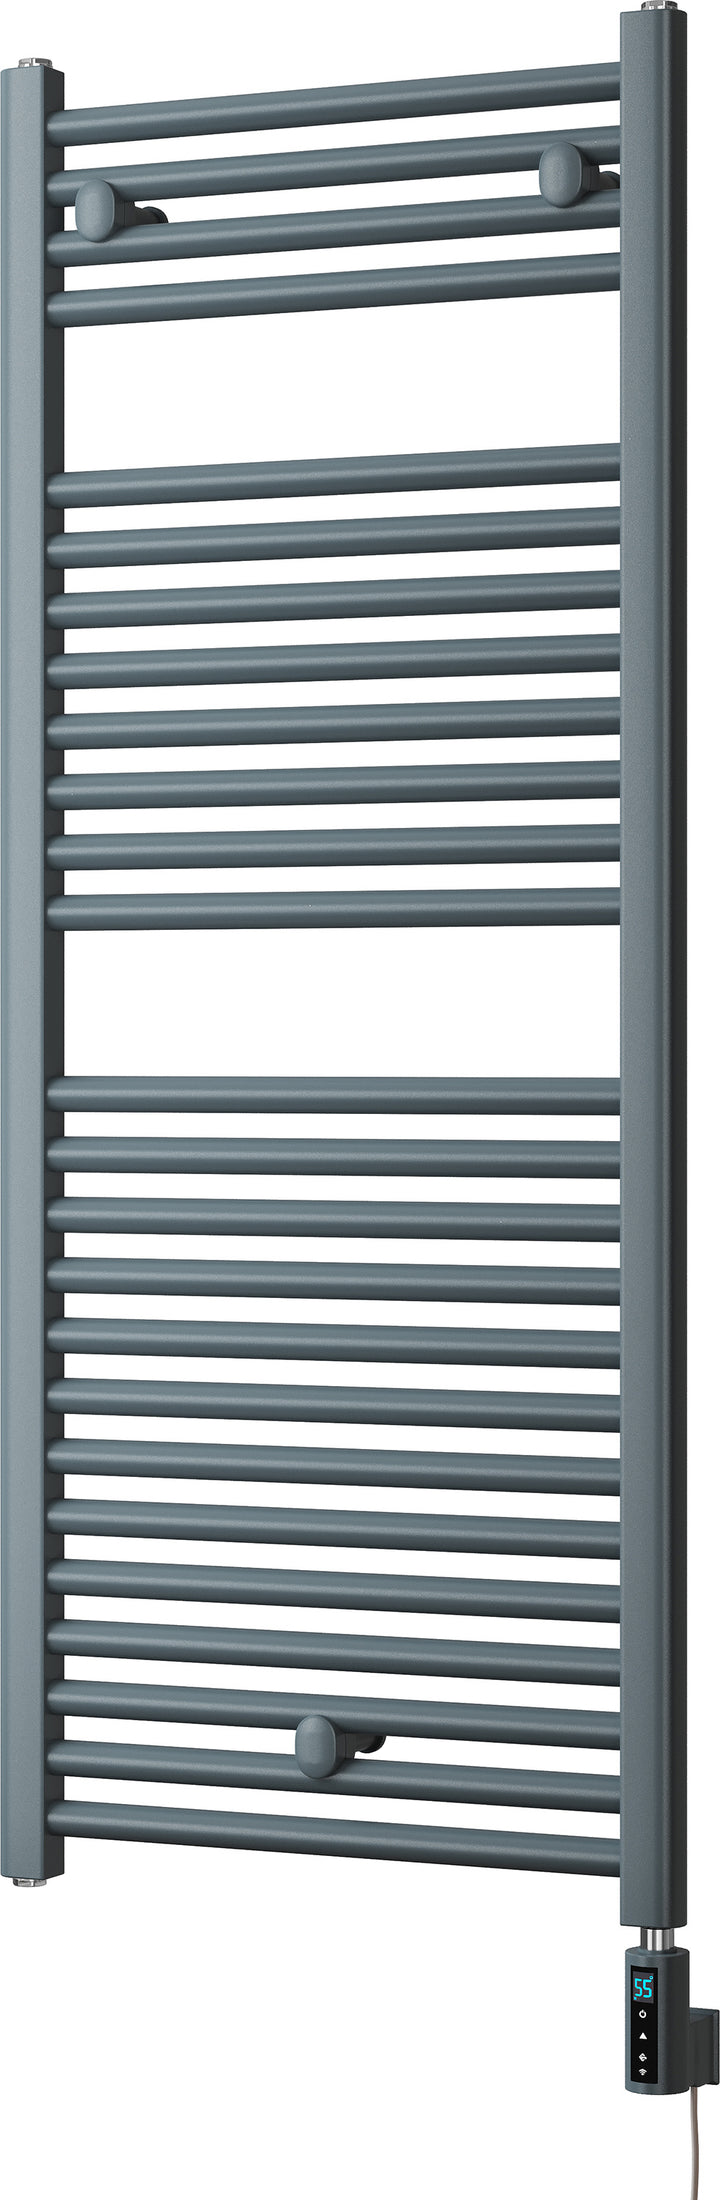 Roma - Anthracite Electric Towel Rail H1230mm x W500mm Straight 600w Thermostatic WIFI